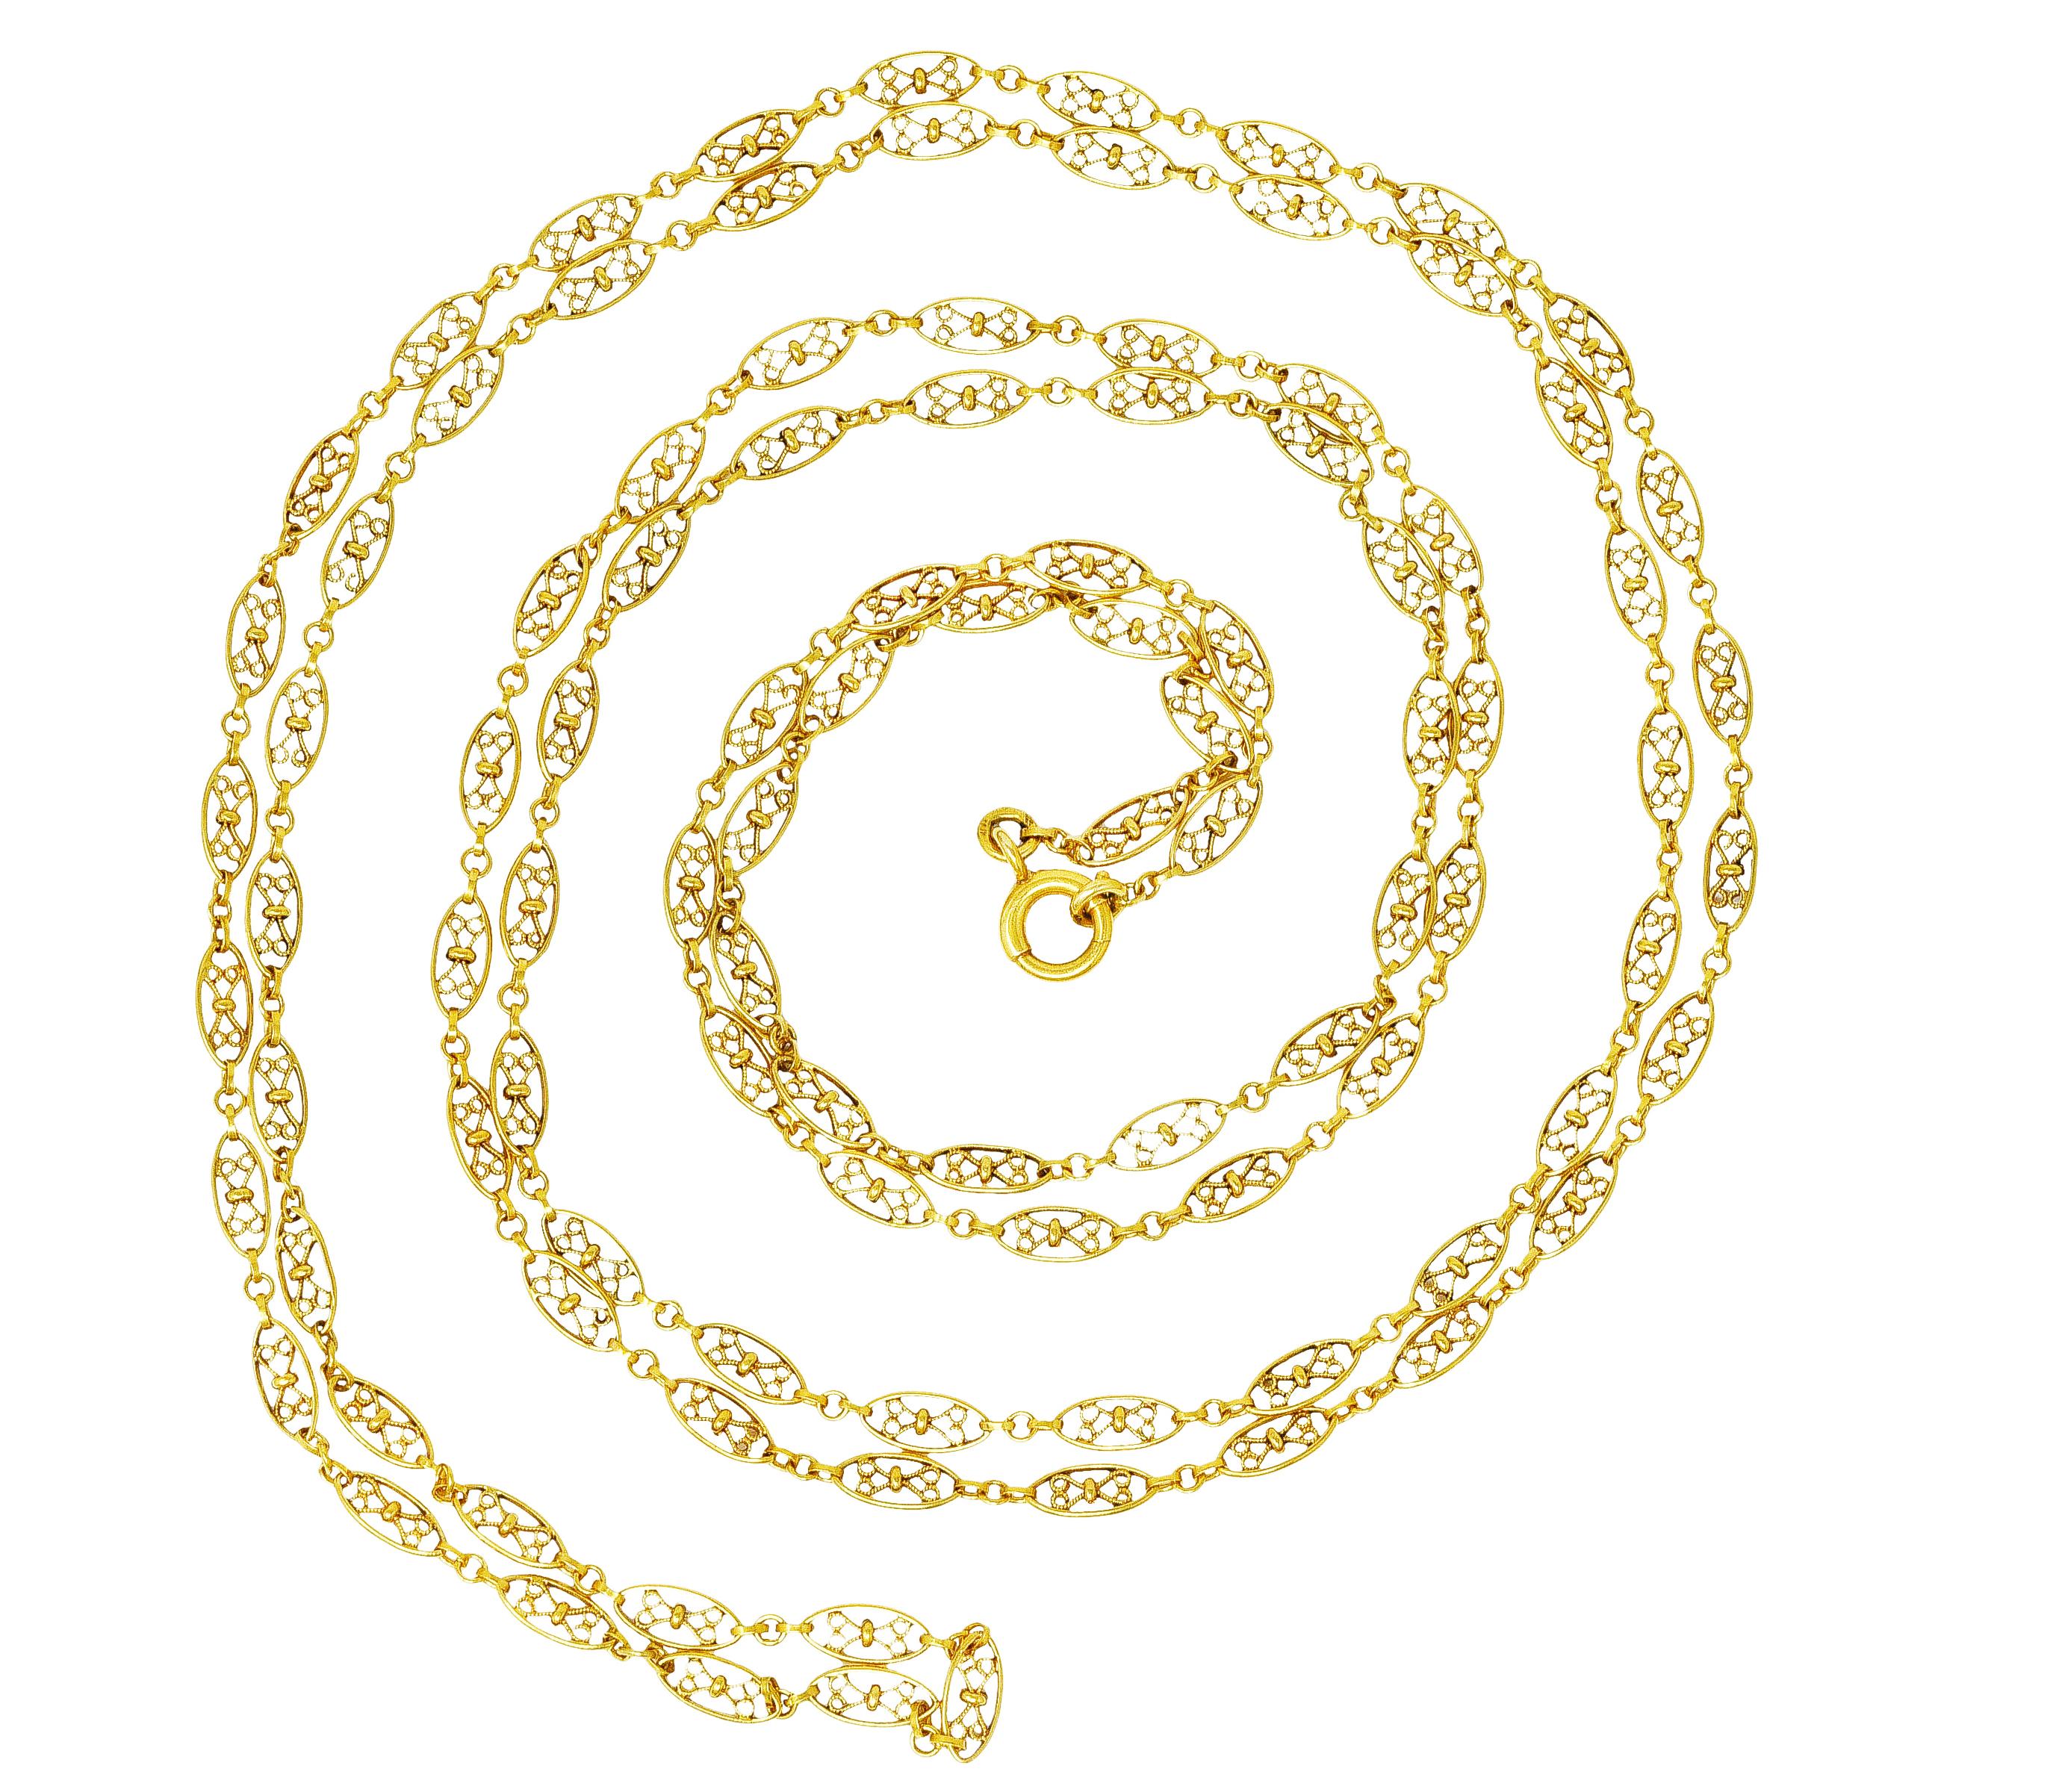 Necklace is comprised of navette shaped links connected by round jump rings. Centering scrolling heart motif filigree. Completed by spring clasp closure. Stamped with French hallmarks for 18 karat gold. With maker's mark. Circa: 1860's. Length: 60